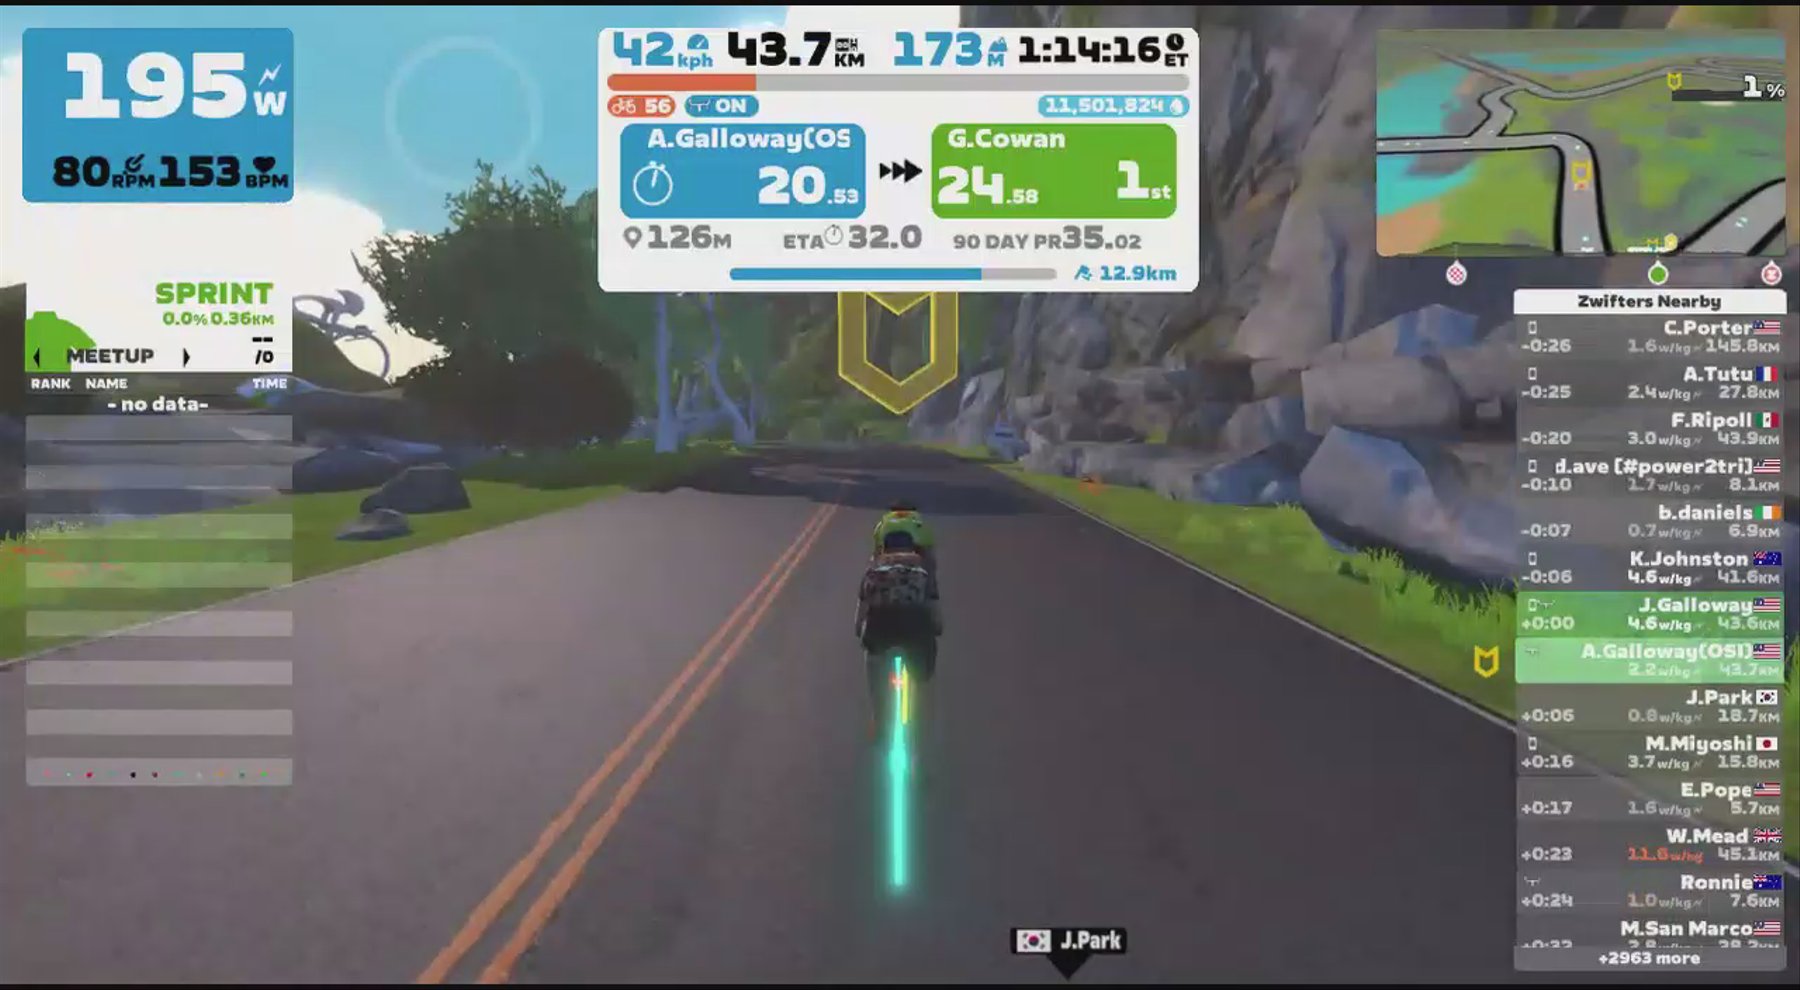 Zwift - Andrew Galloway(OSI)'s Meetup on Spiral into the Volcano in Watopia